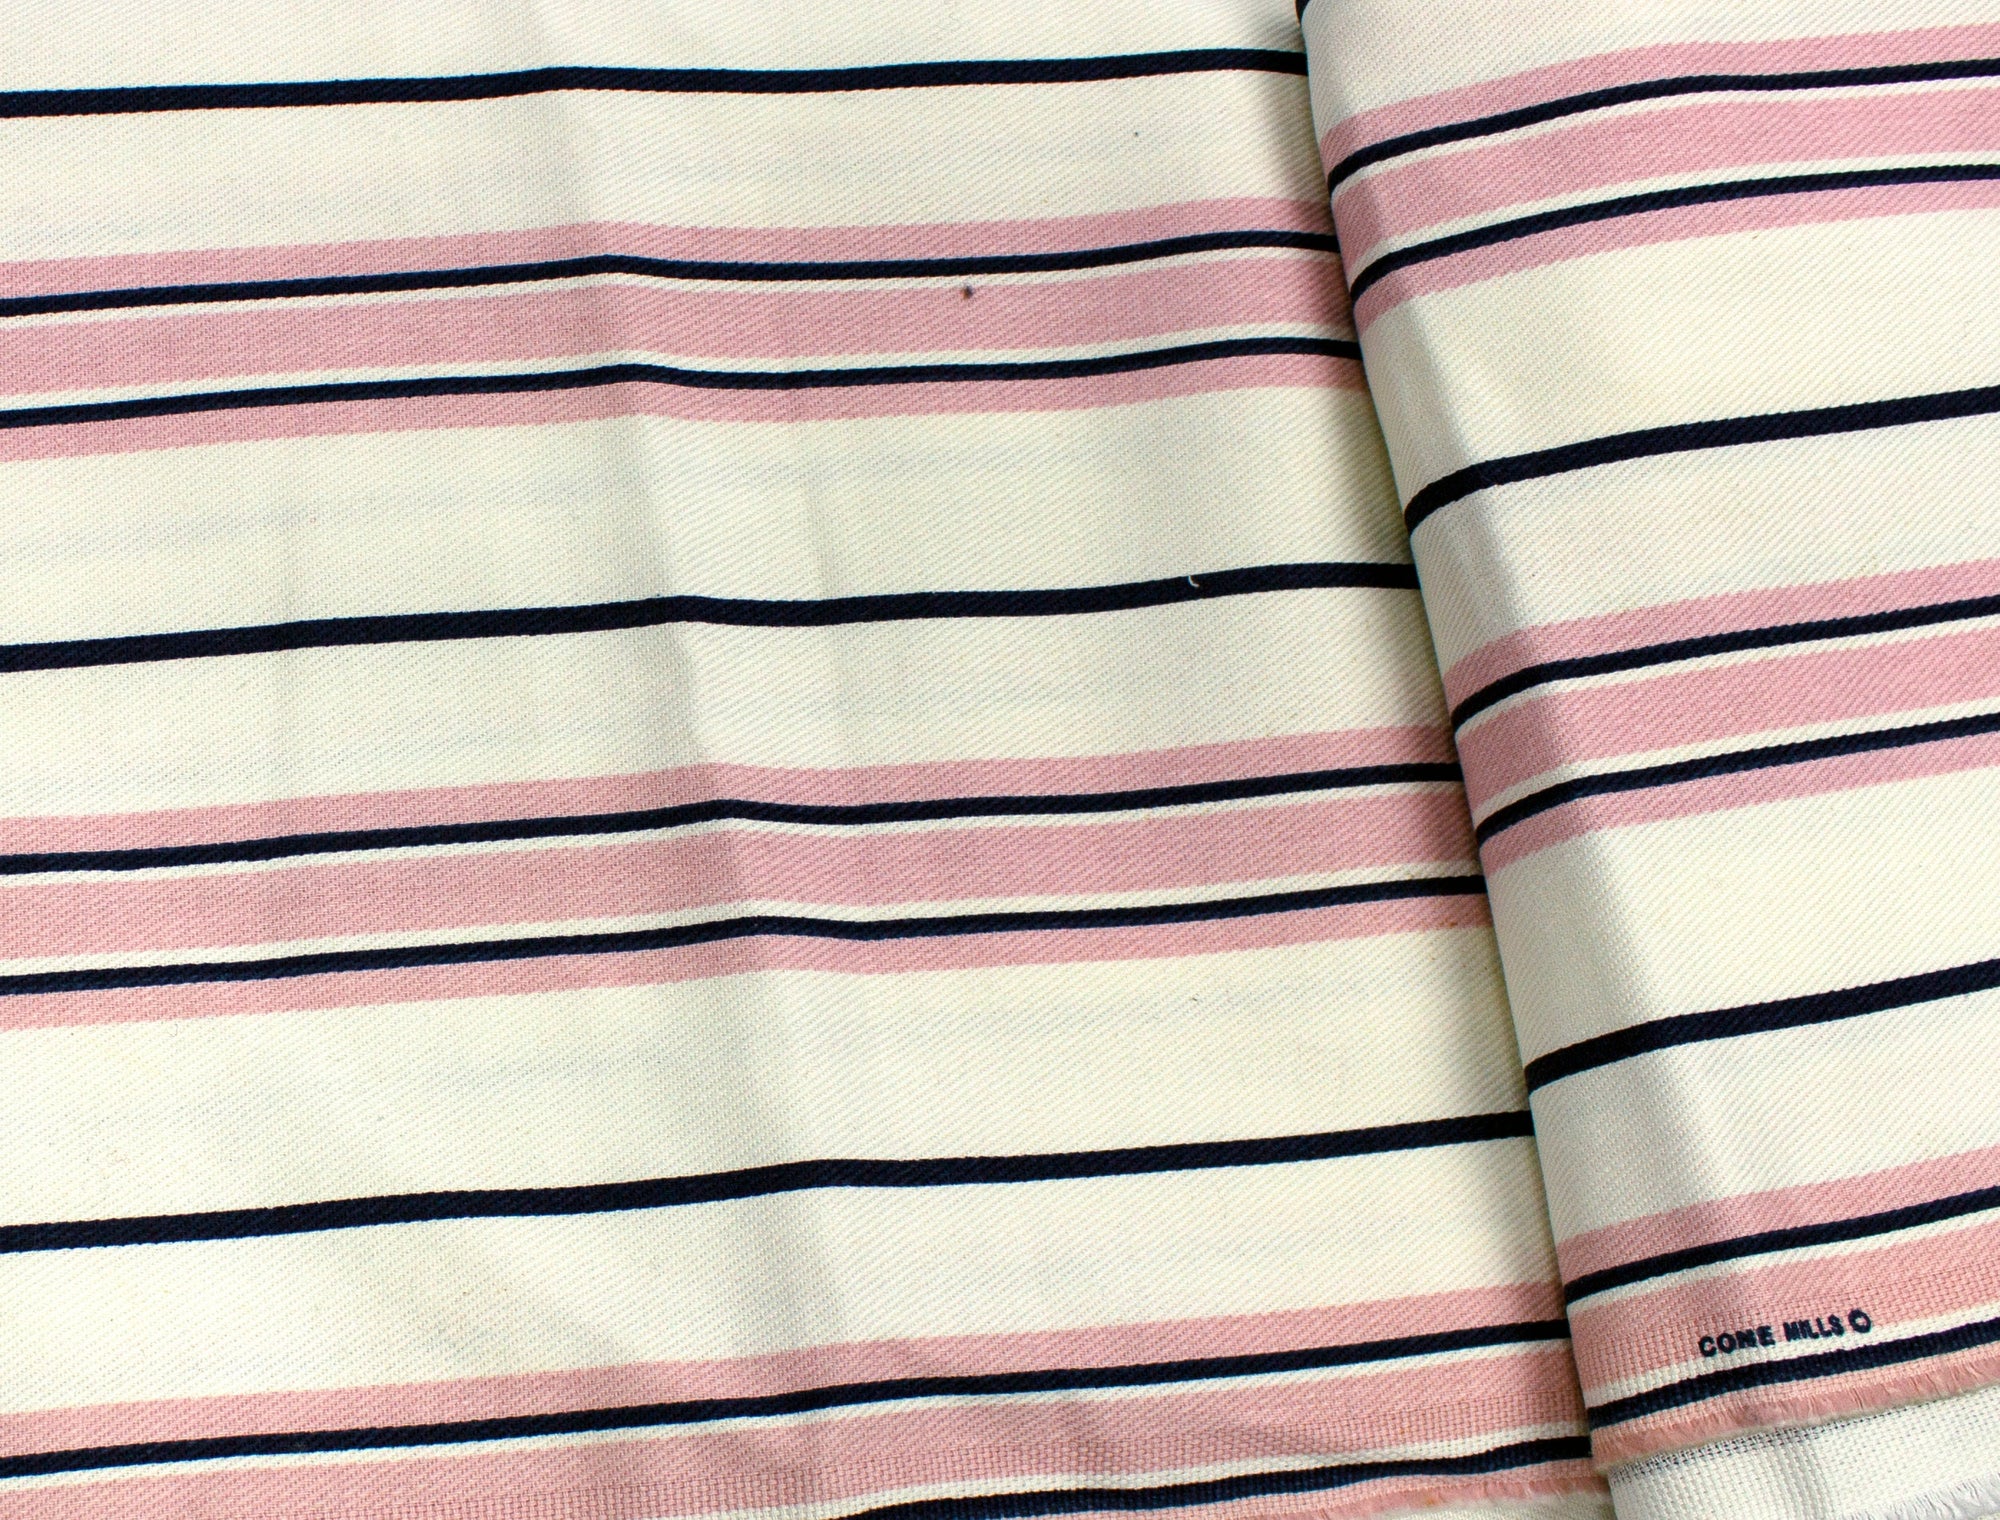 Vintage Fabric Ivory with Navy and Pink Stripes - Measures 47" x 63"